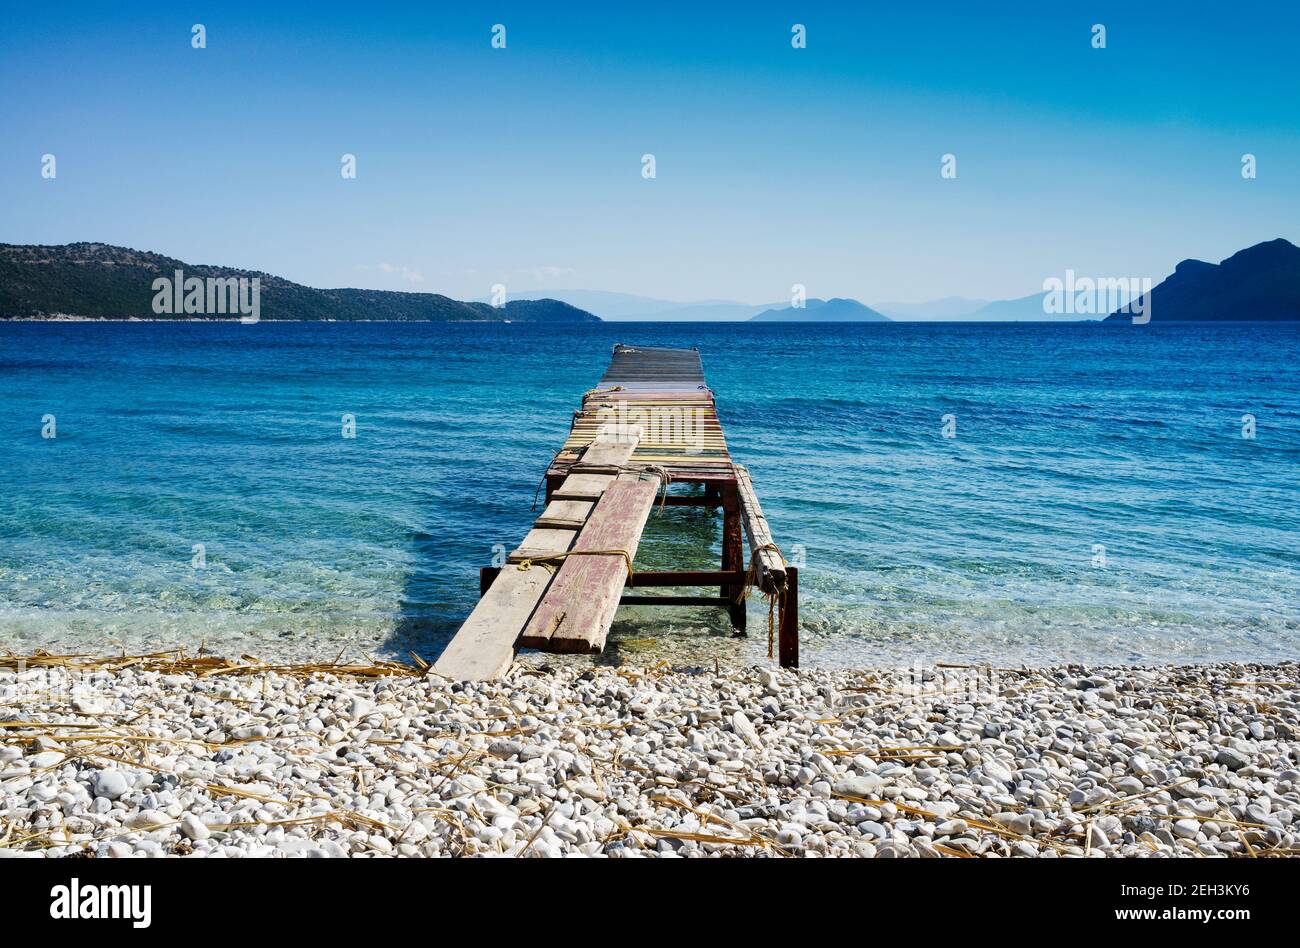 Seaview from beach on Kalamos, Ionian. Kastos in the distance. Stock Photo